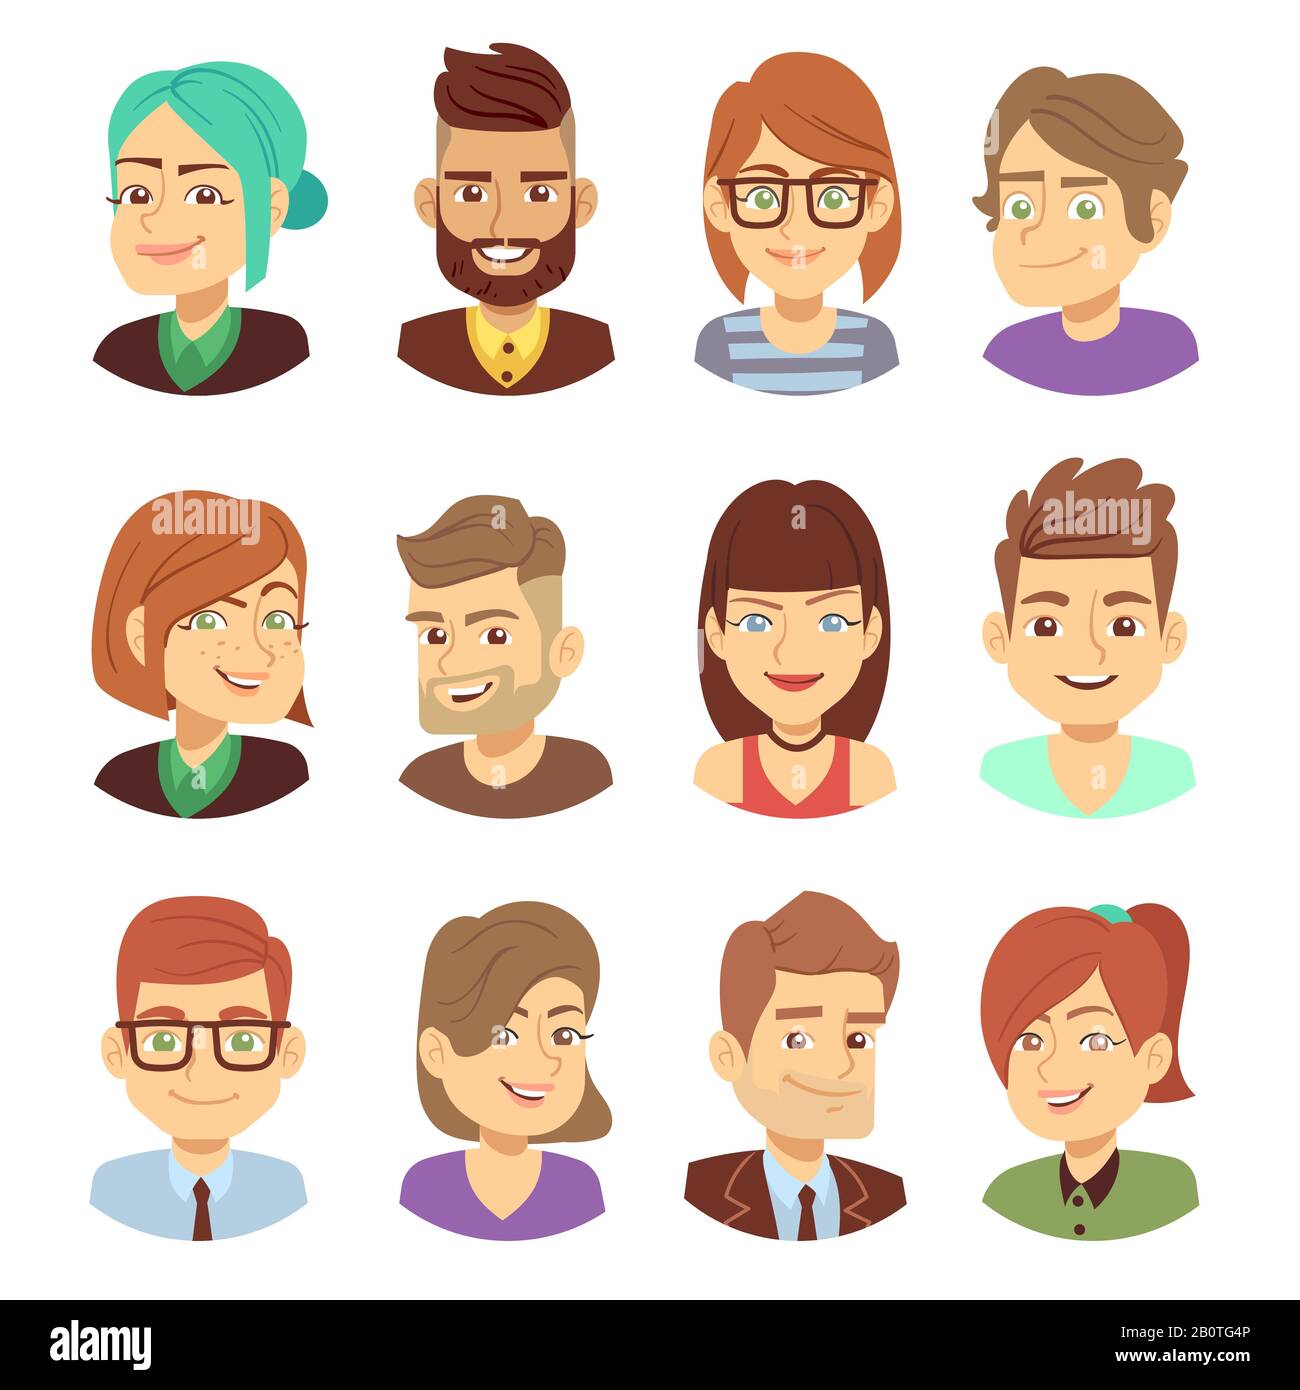 Free Vector  Cartoon people avatar collection